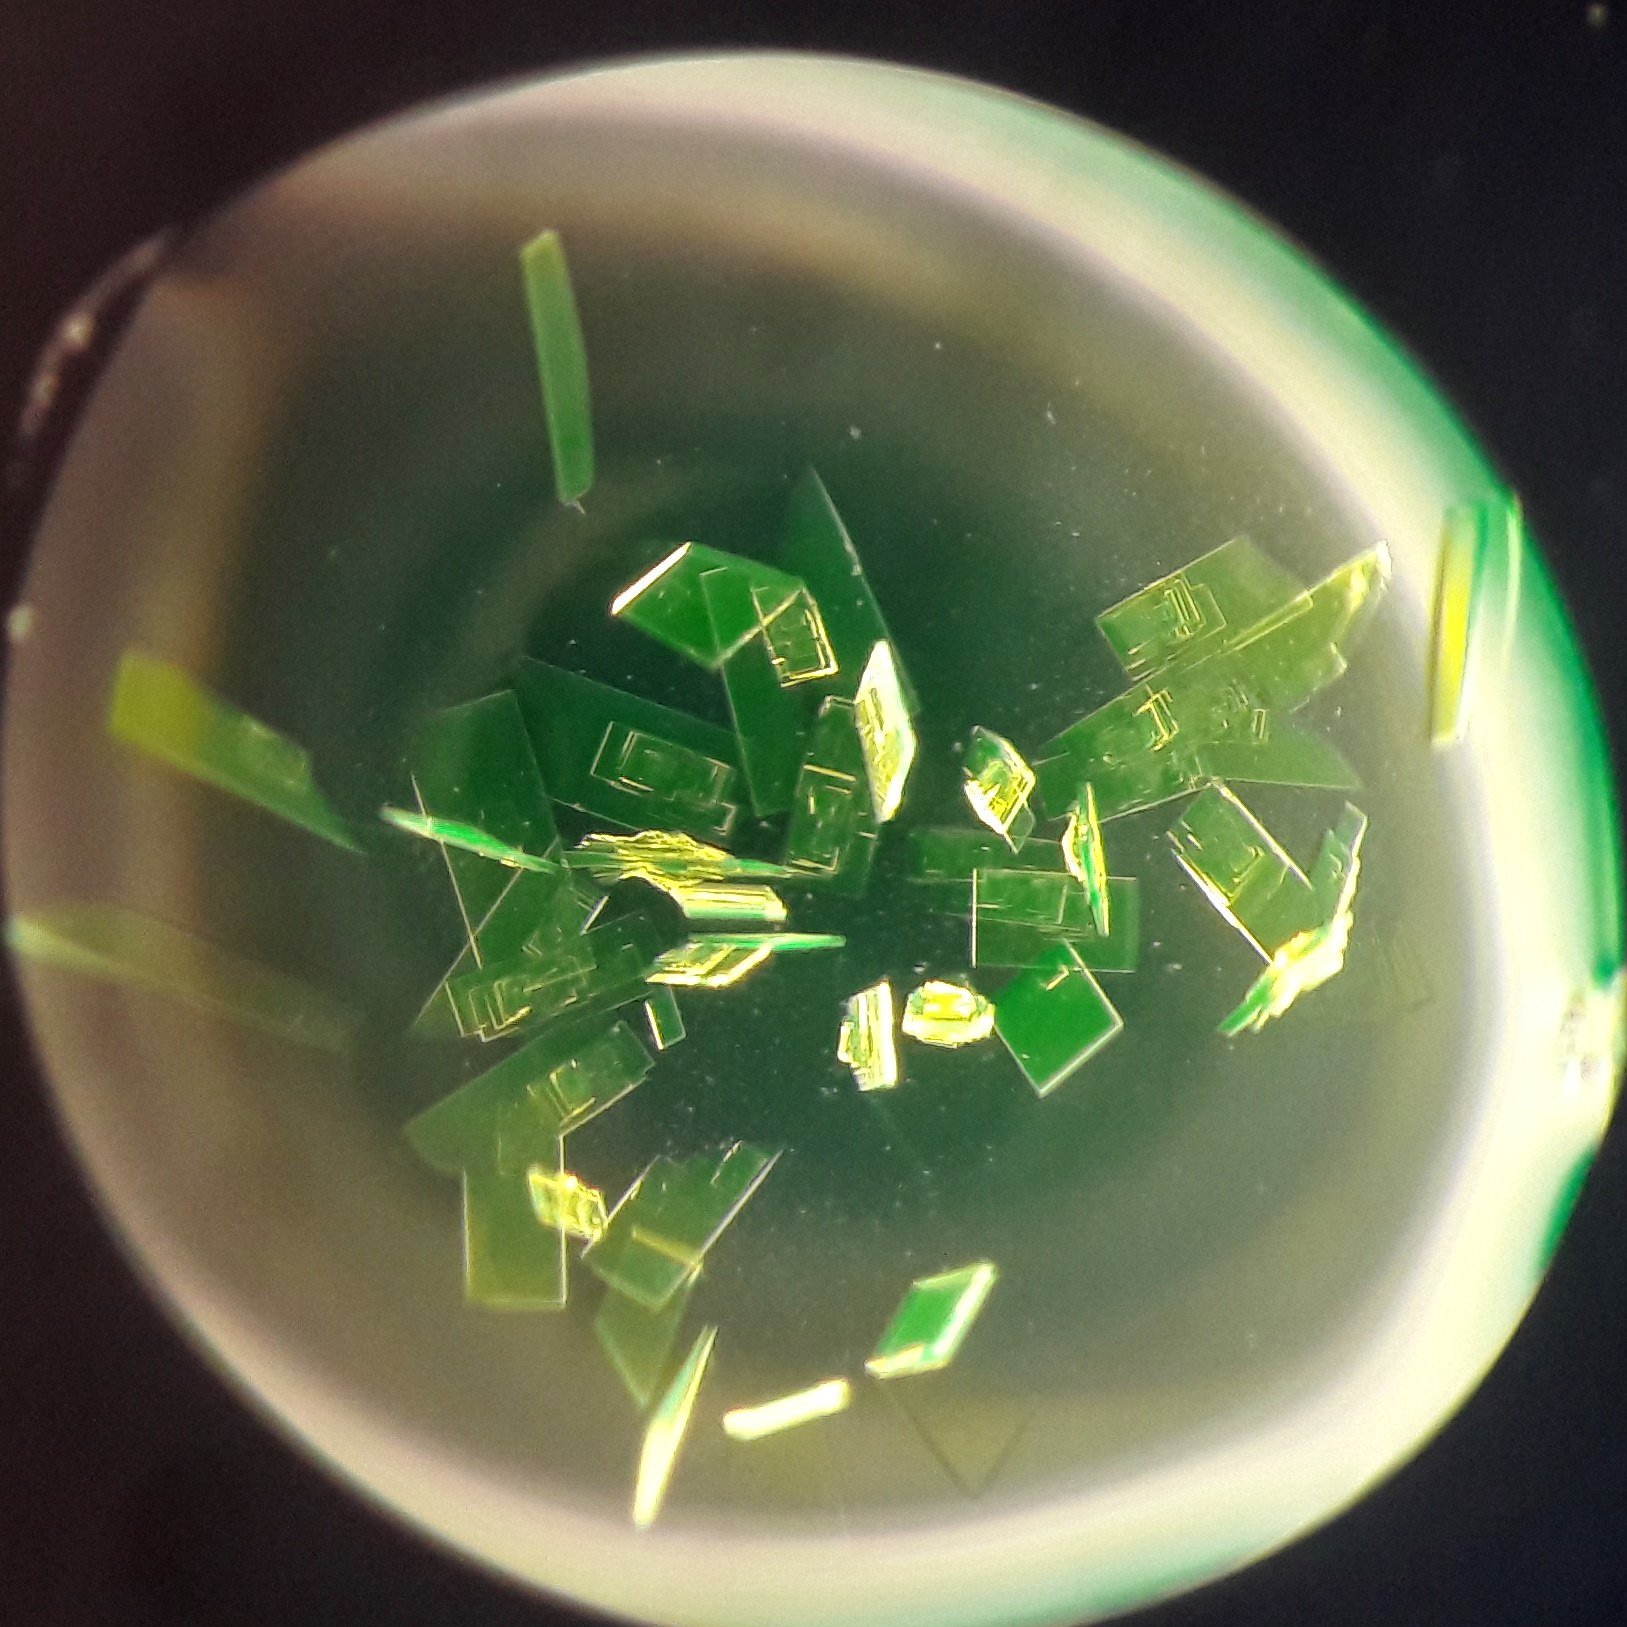 Crystals of the fluorescent protein mTurquoise2 as seen in an optical microscope. (Photo: Josef Lazar / IOCB Prague)